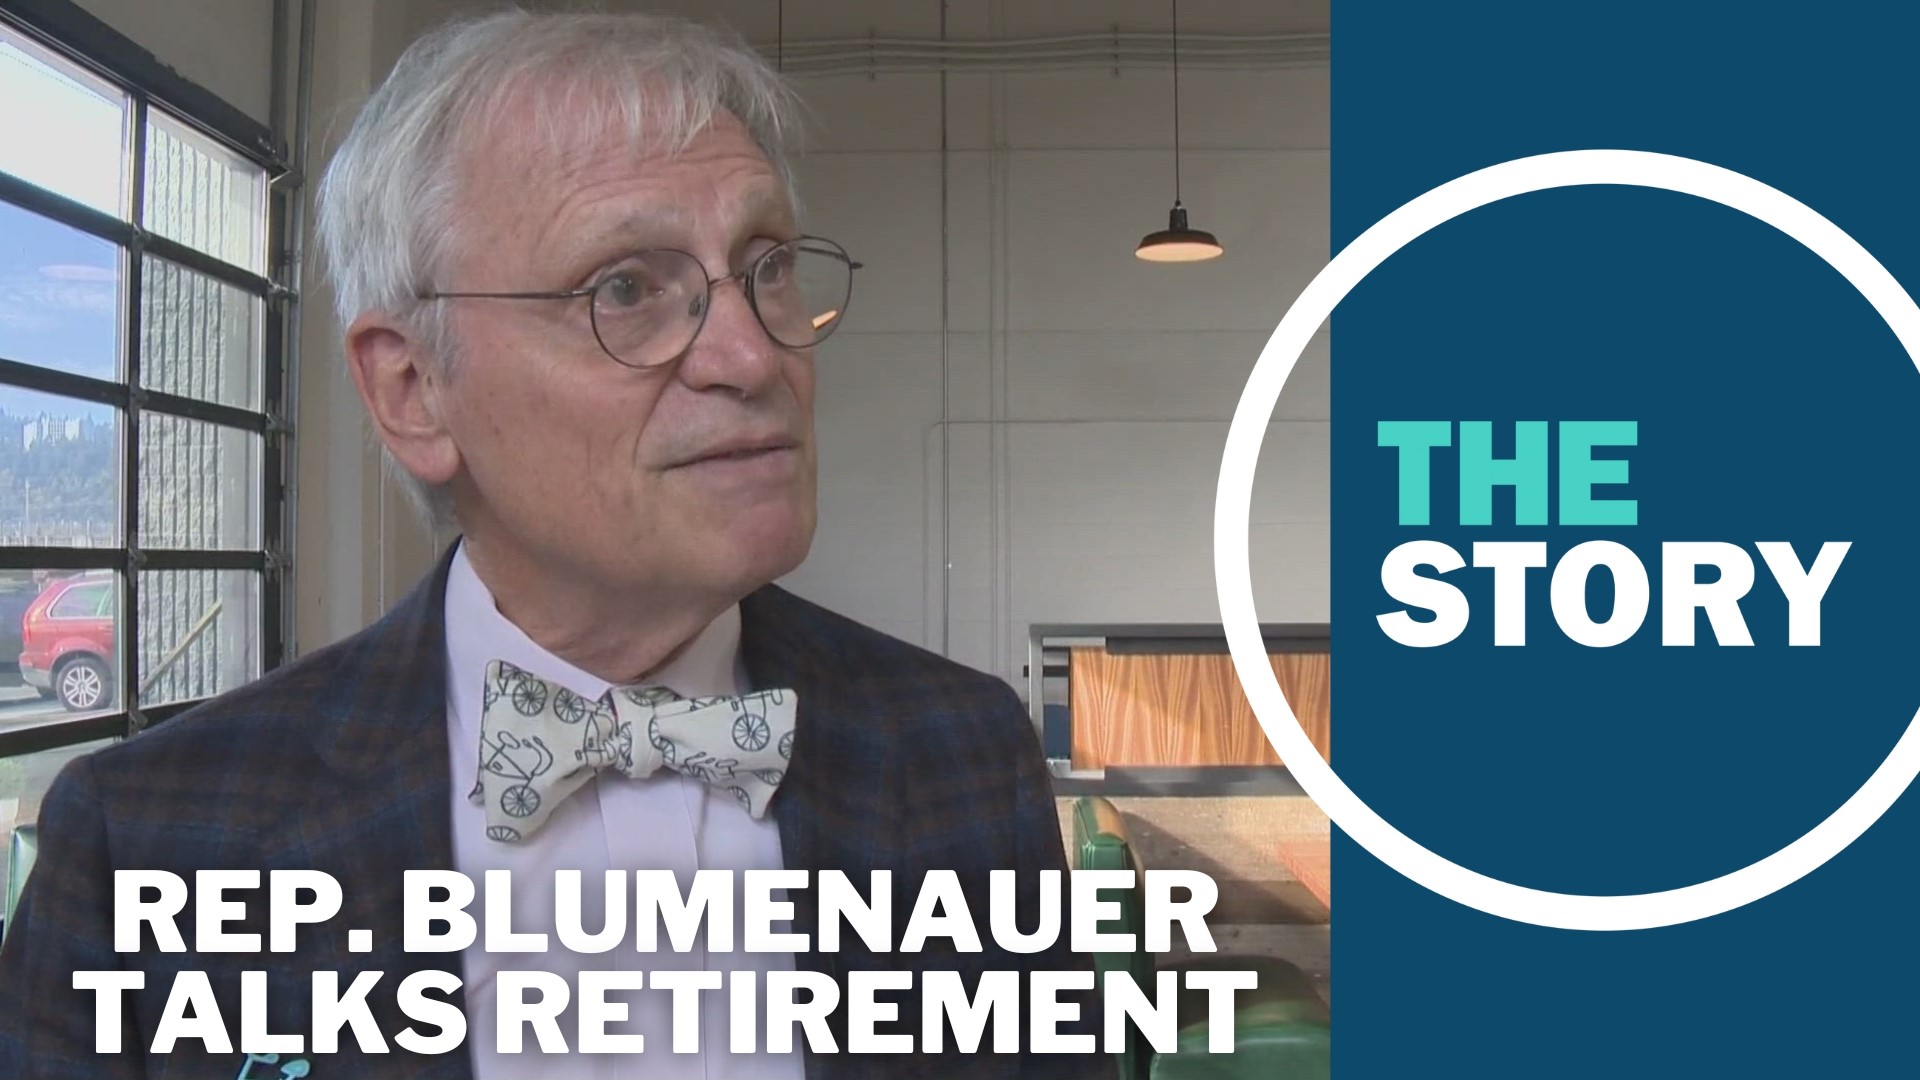 After announcing his coming retirement, Congressman Earl Blumenauer waxed philosophical with reporters at a press conference Tuesday morning.